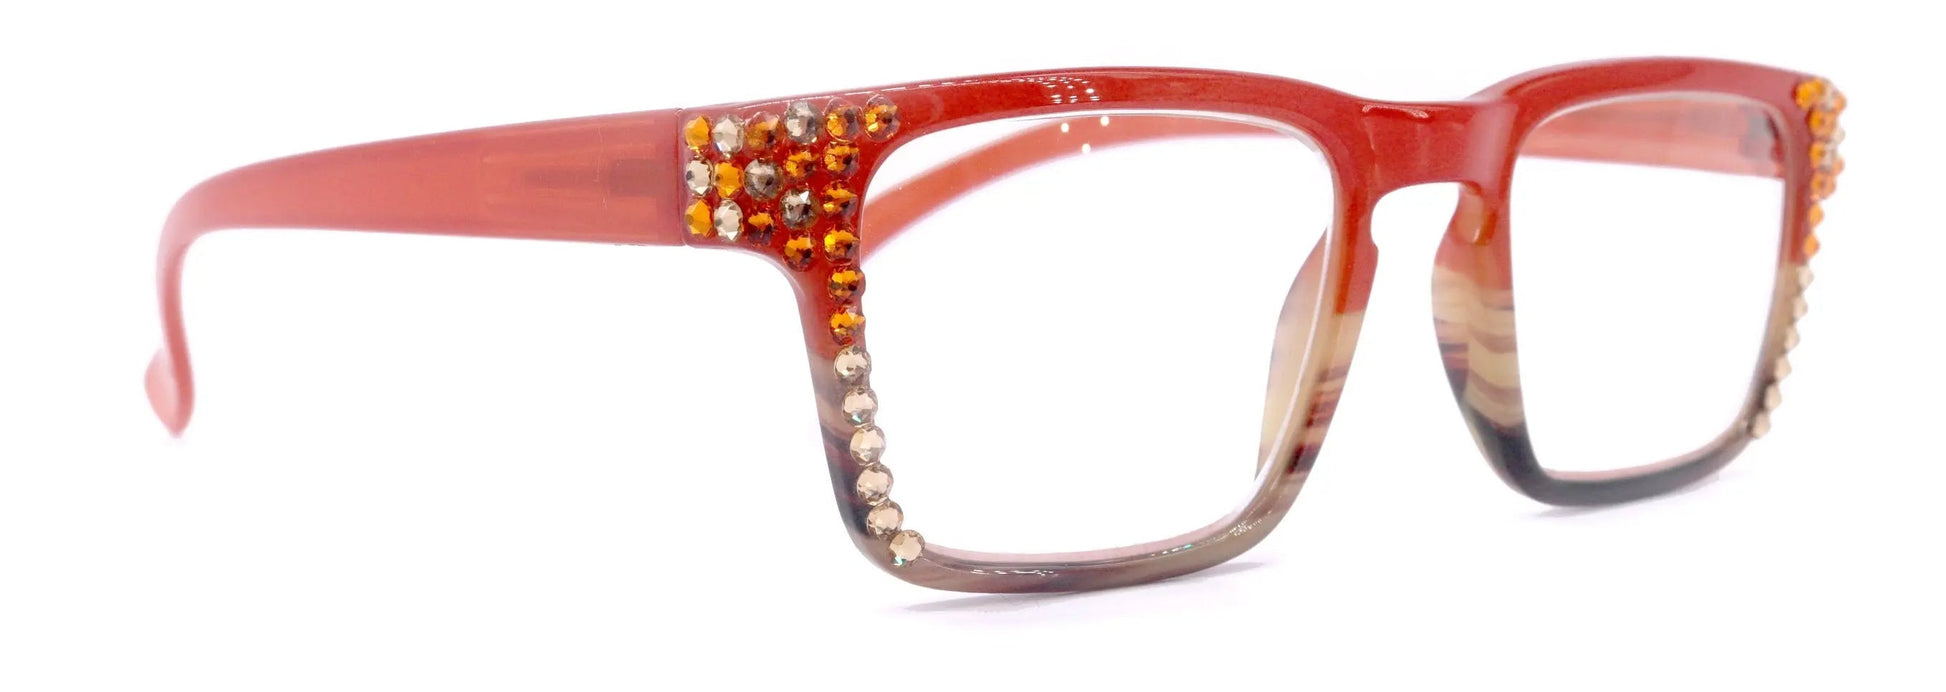 Piper, (Bling) Reading Glasses for Women W (Tangerine, L. Colorado) Genuine European Crystals. (Orange Brown Faded Stripes) NY Fifth Avenue 